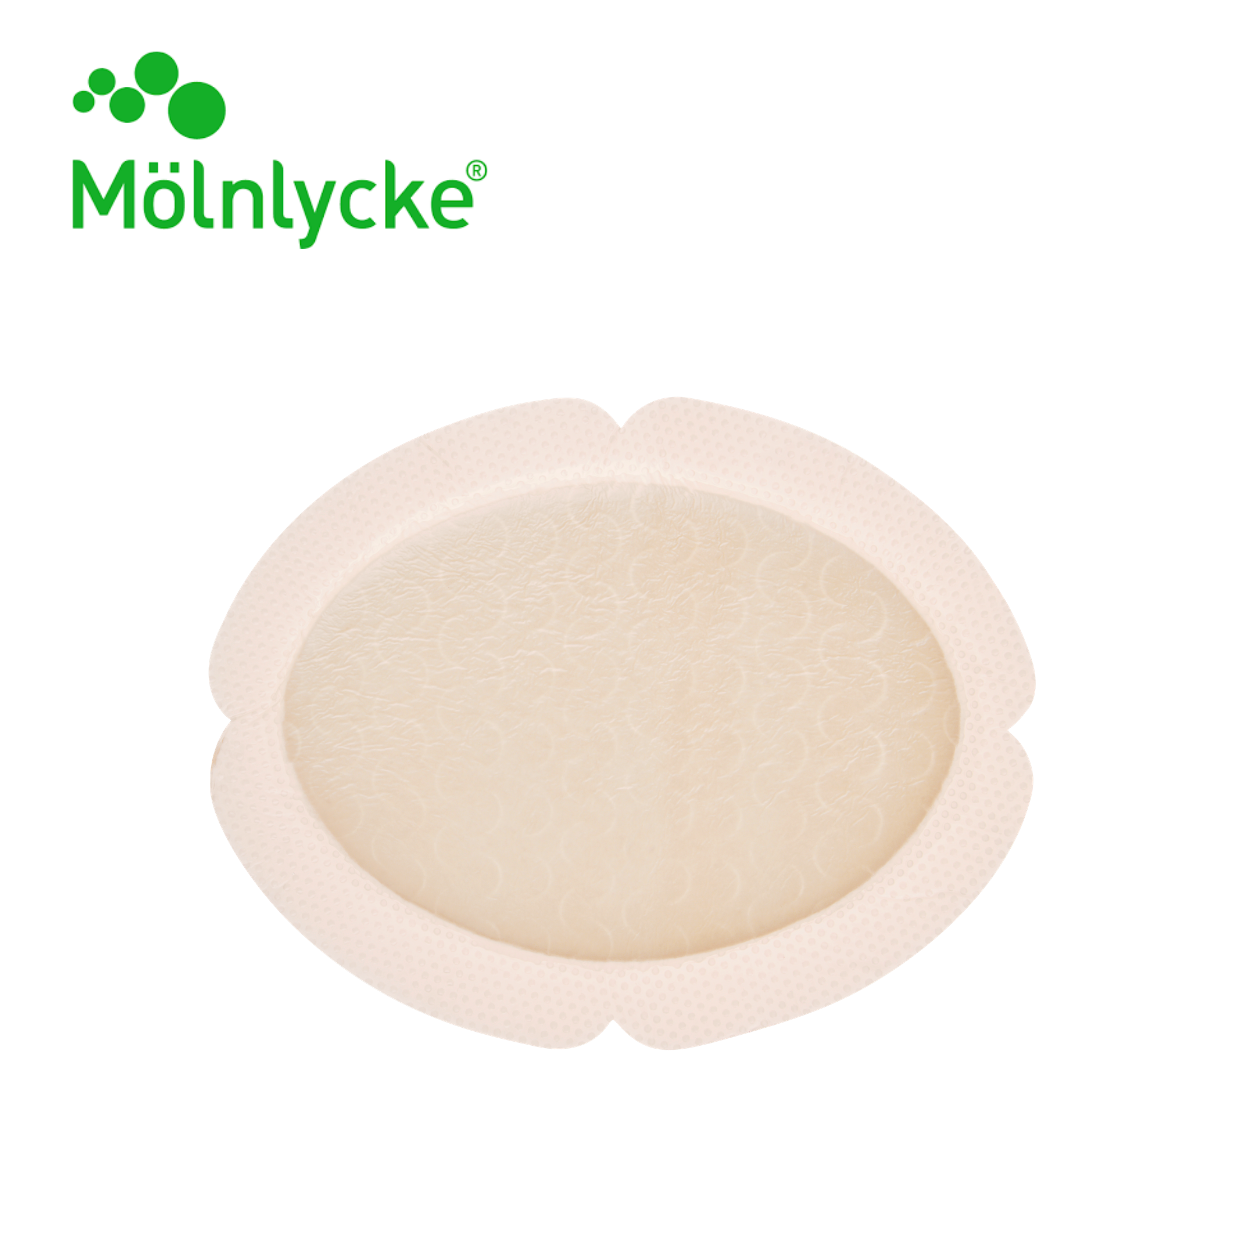 Molnlycke Products (15)